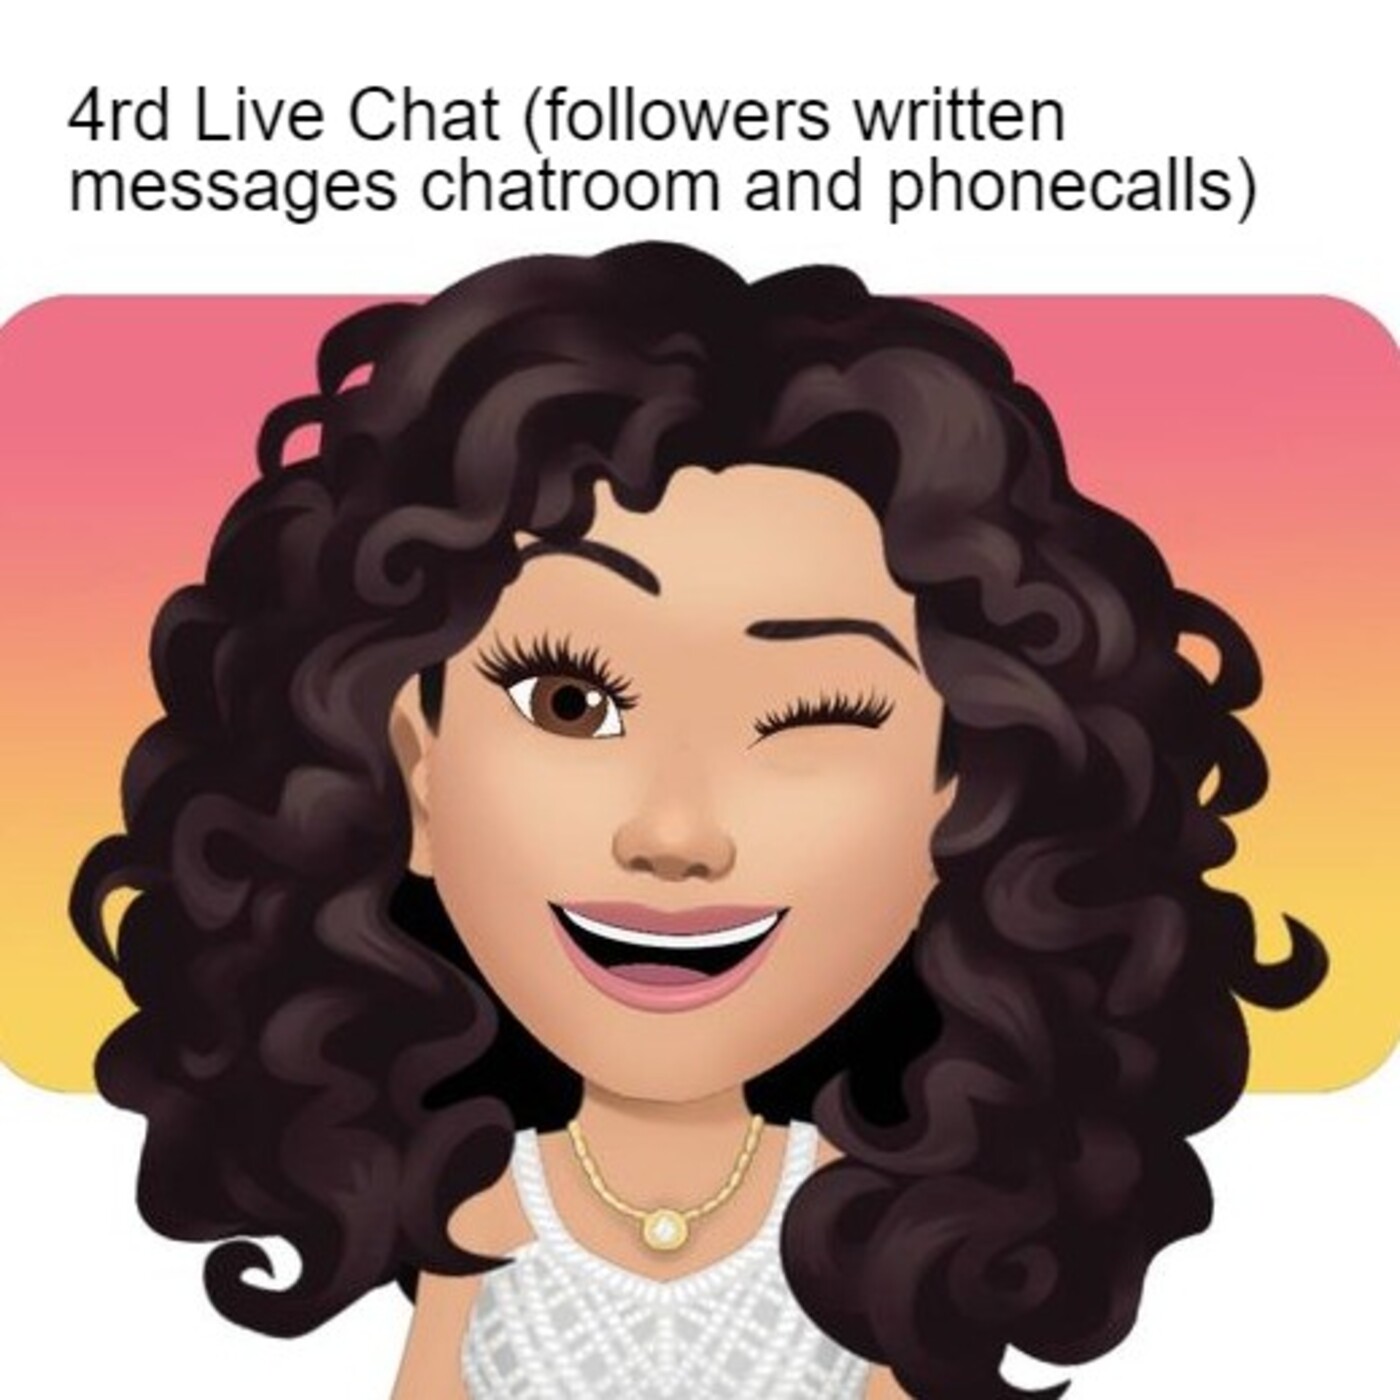 4th Live Chat (followers written messages chatroom and phonecalls)